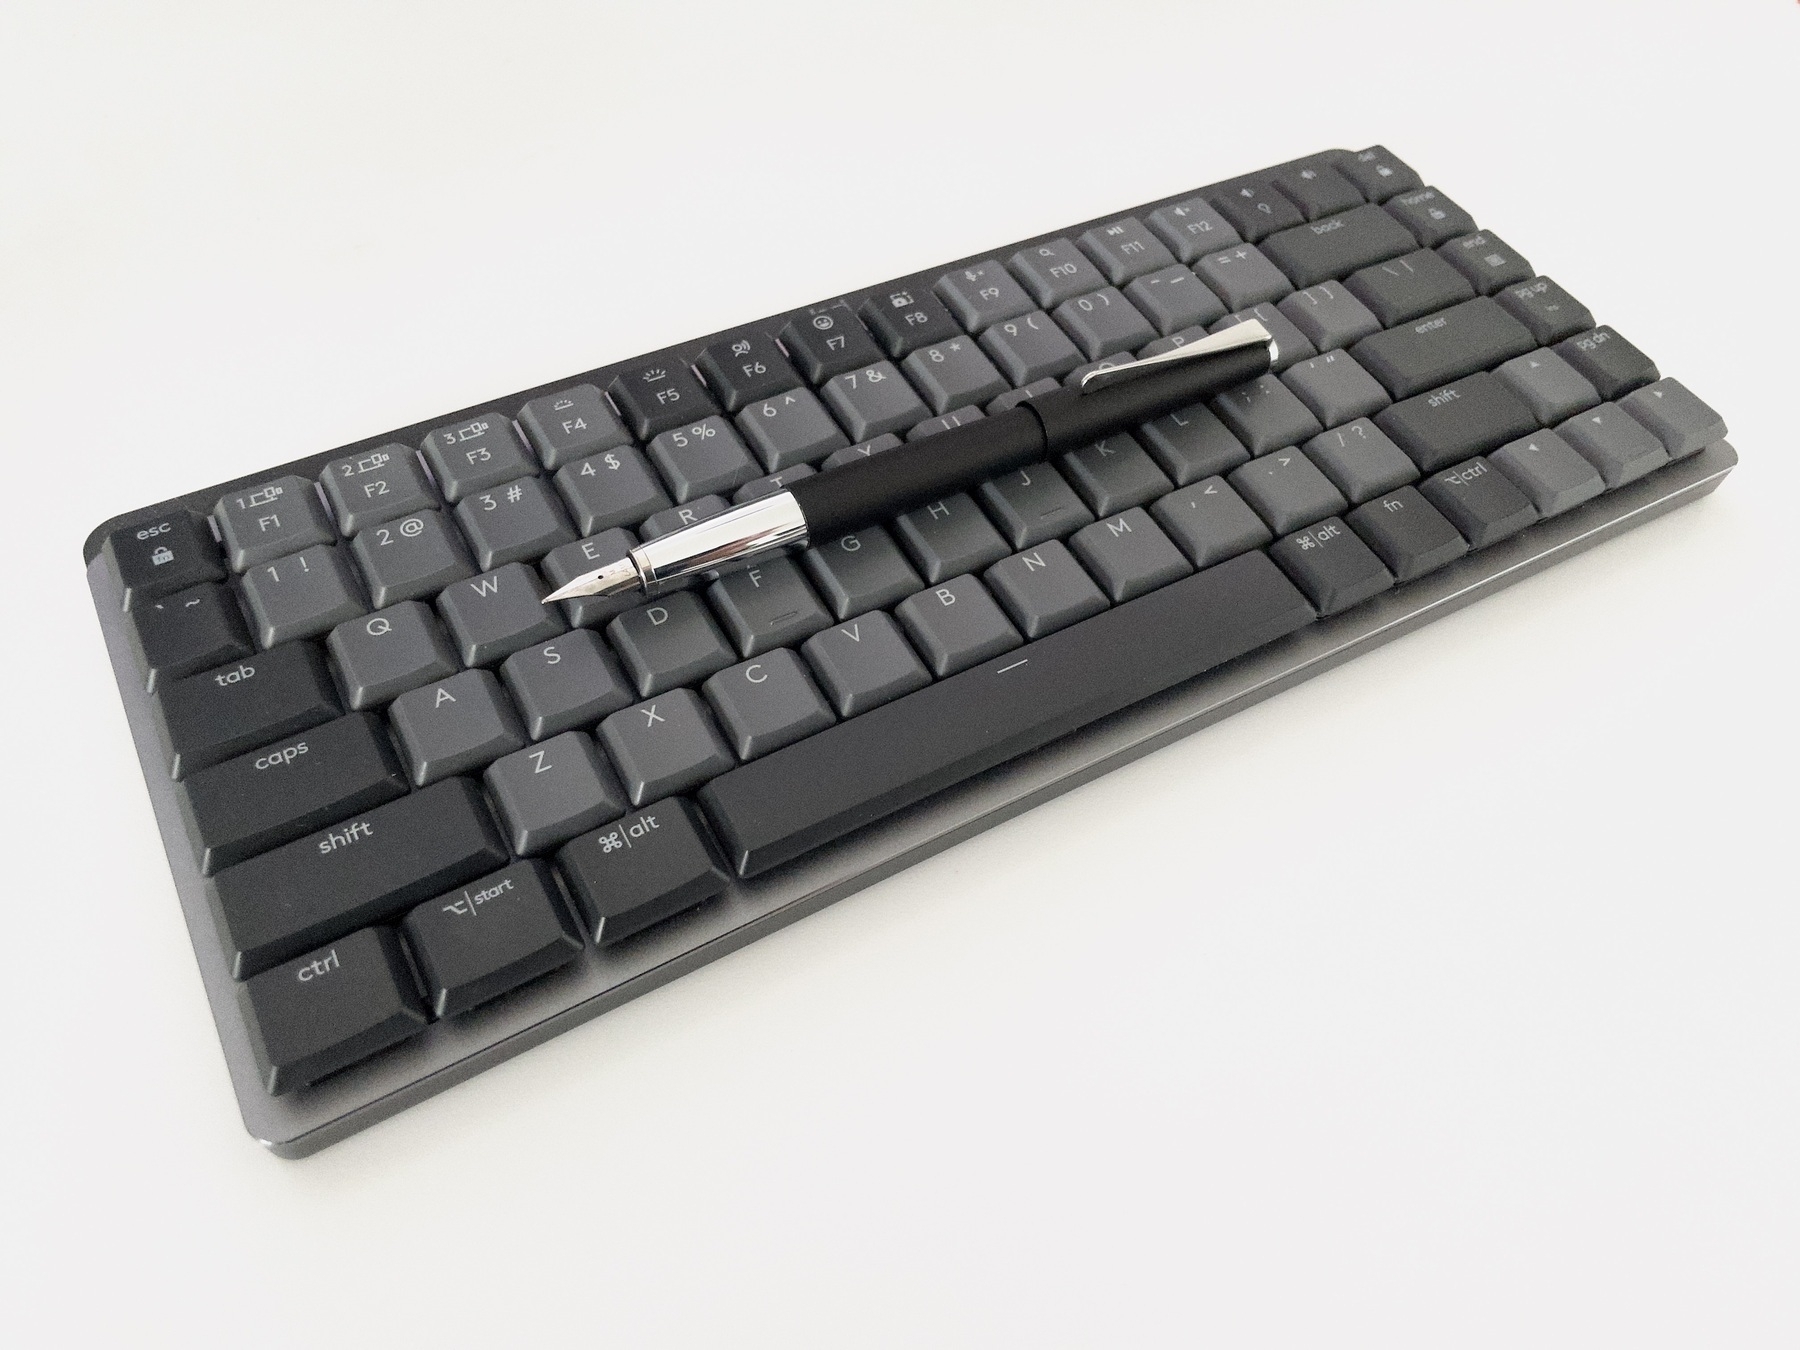 A Lamy Studio fountain pen in black with chrome accents, cap posted, sits atop a Logitech MX Mechanical Mini keyboard in dark grey. The background is a white desktop, giving the image a monochromatic feel without actually being black-and-white.